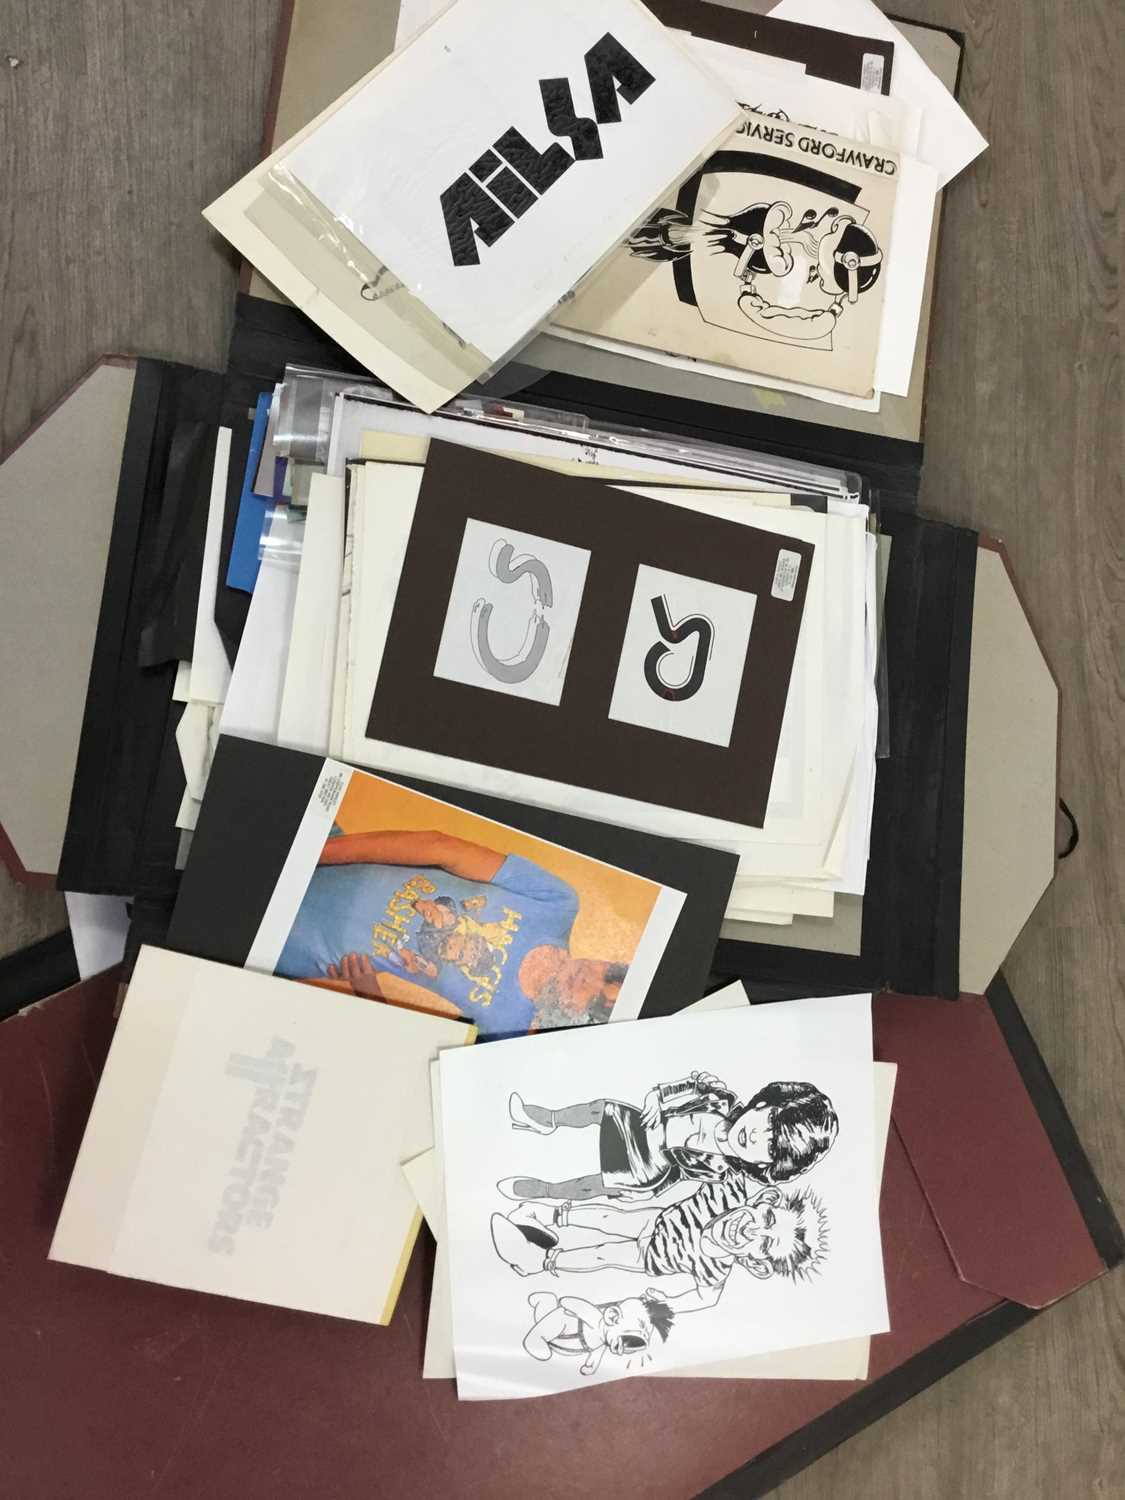 A GROUP OG FOLIOS CONTAINING VARIOUS PRINTS AND SKETCHES